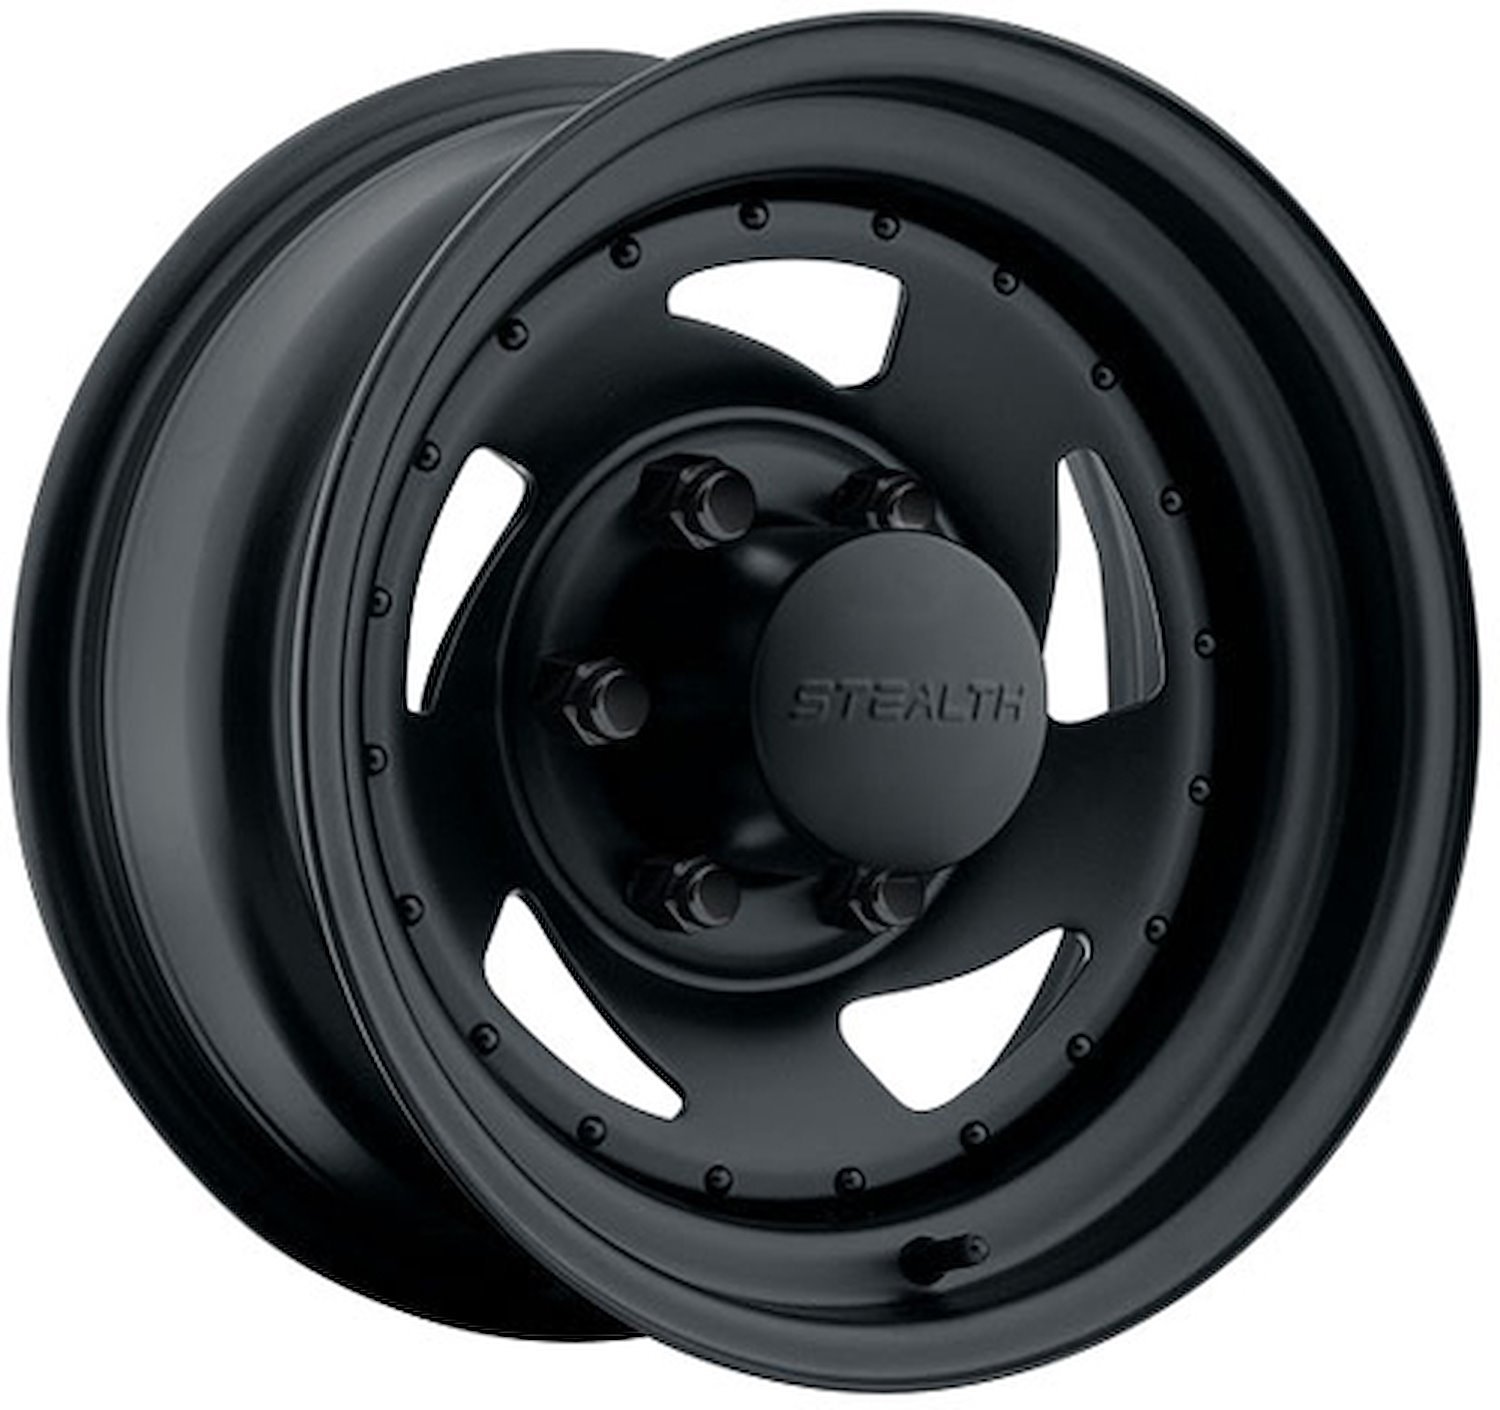 STEALTH BLACK BLADE 15 x 10 5 x 55 Bolt Circle 375 Back Spacing 44 offset 428 Center Bore 1500 lbs Load Rating